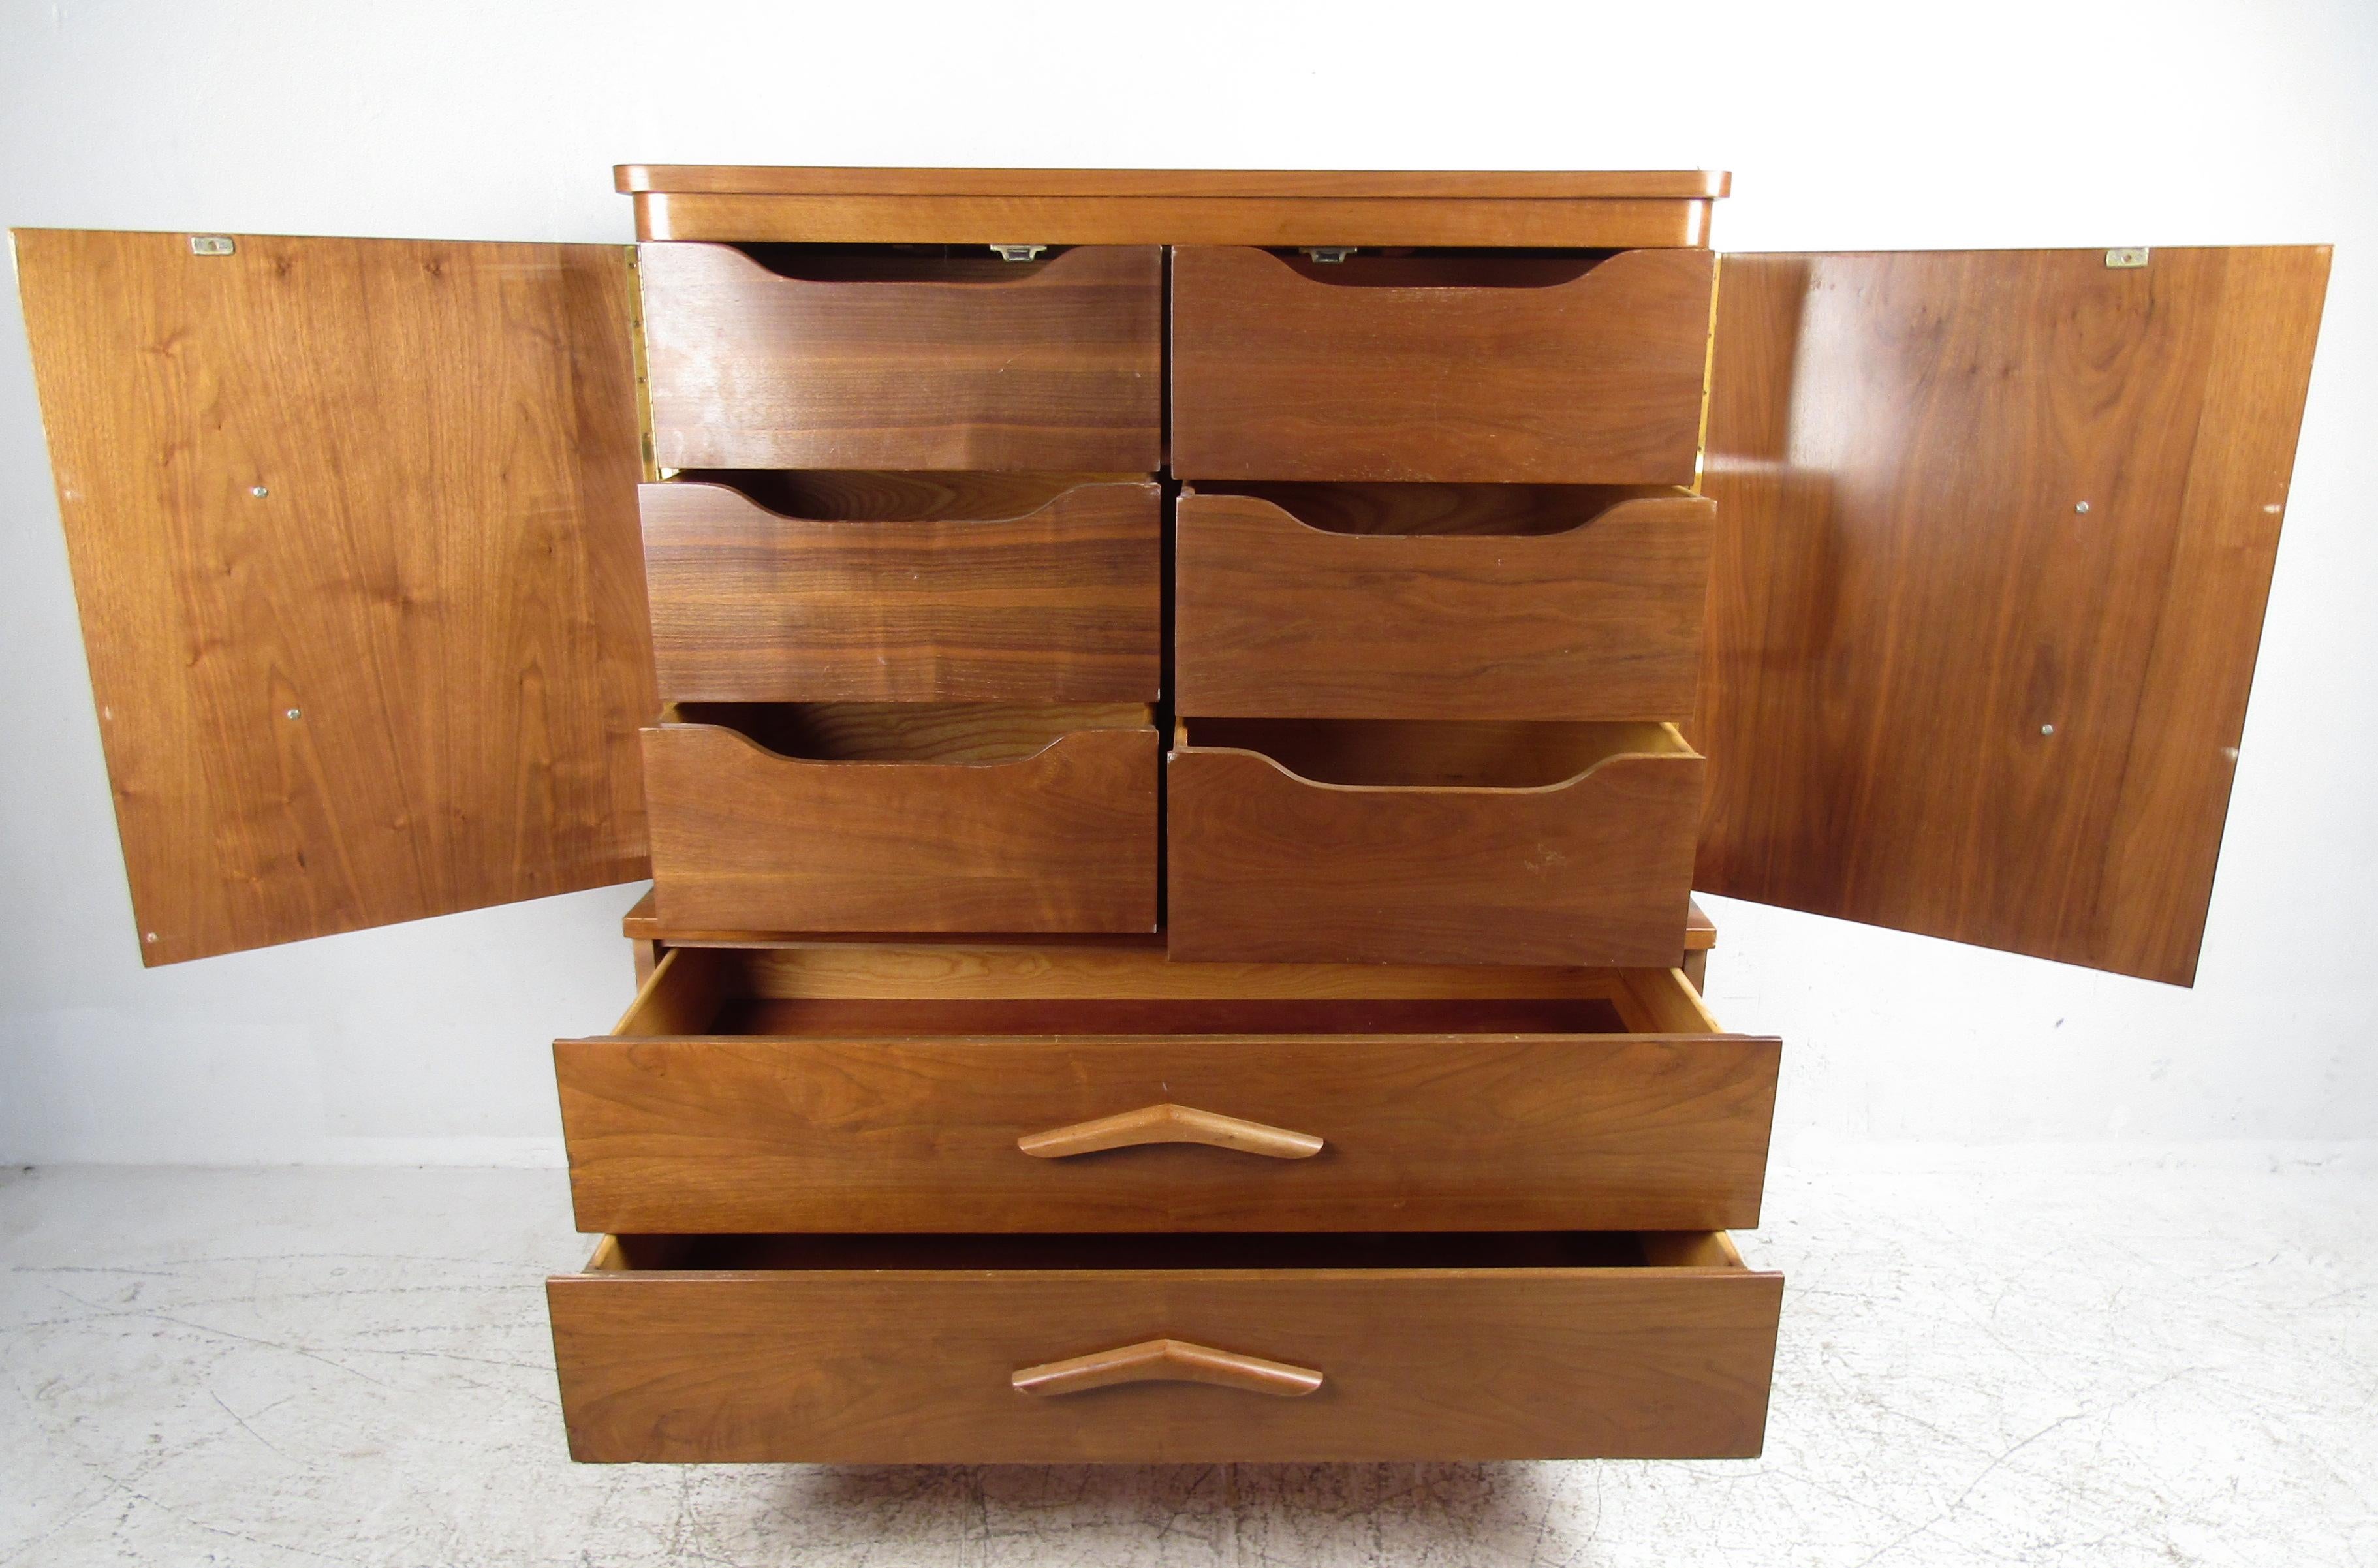 Vintage modern dresser featured in rich walnut grain, six smaller top drawers, two large spacious drawers with carved handles and sturdy sculpted legs.

Please confirm the item location (NY or NJ).
    